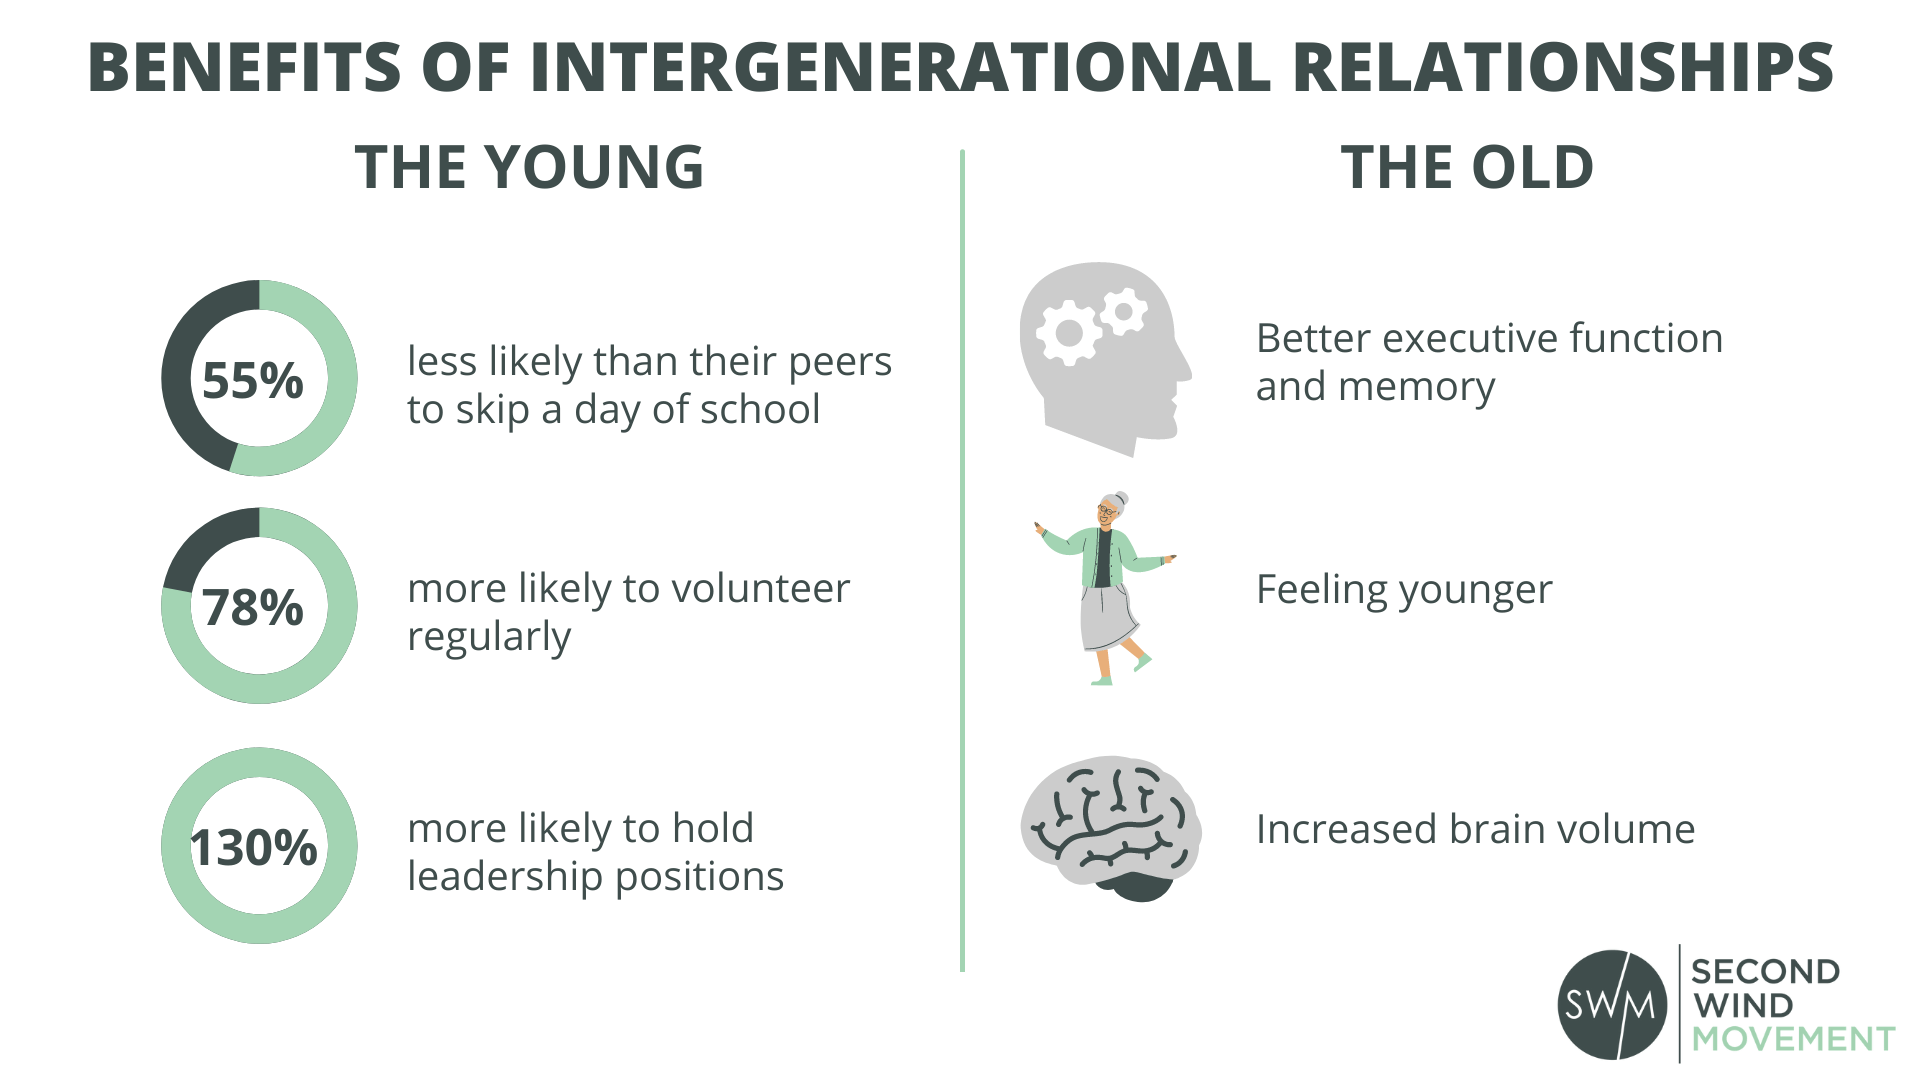 intergenerational relationships benefits for the young generation and for the old senior generation